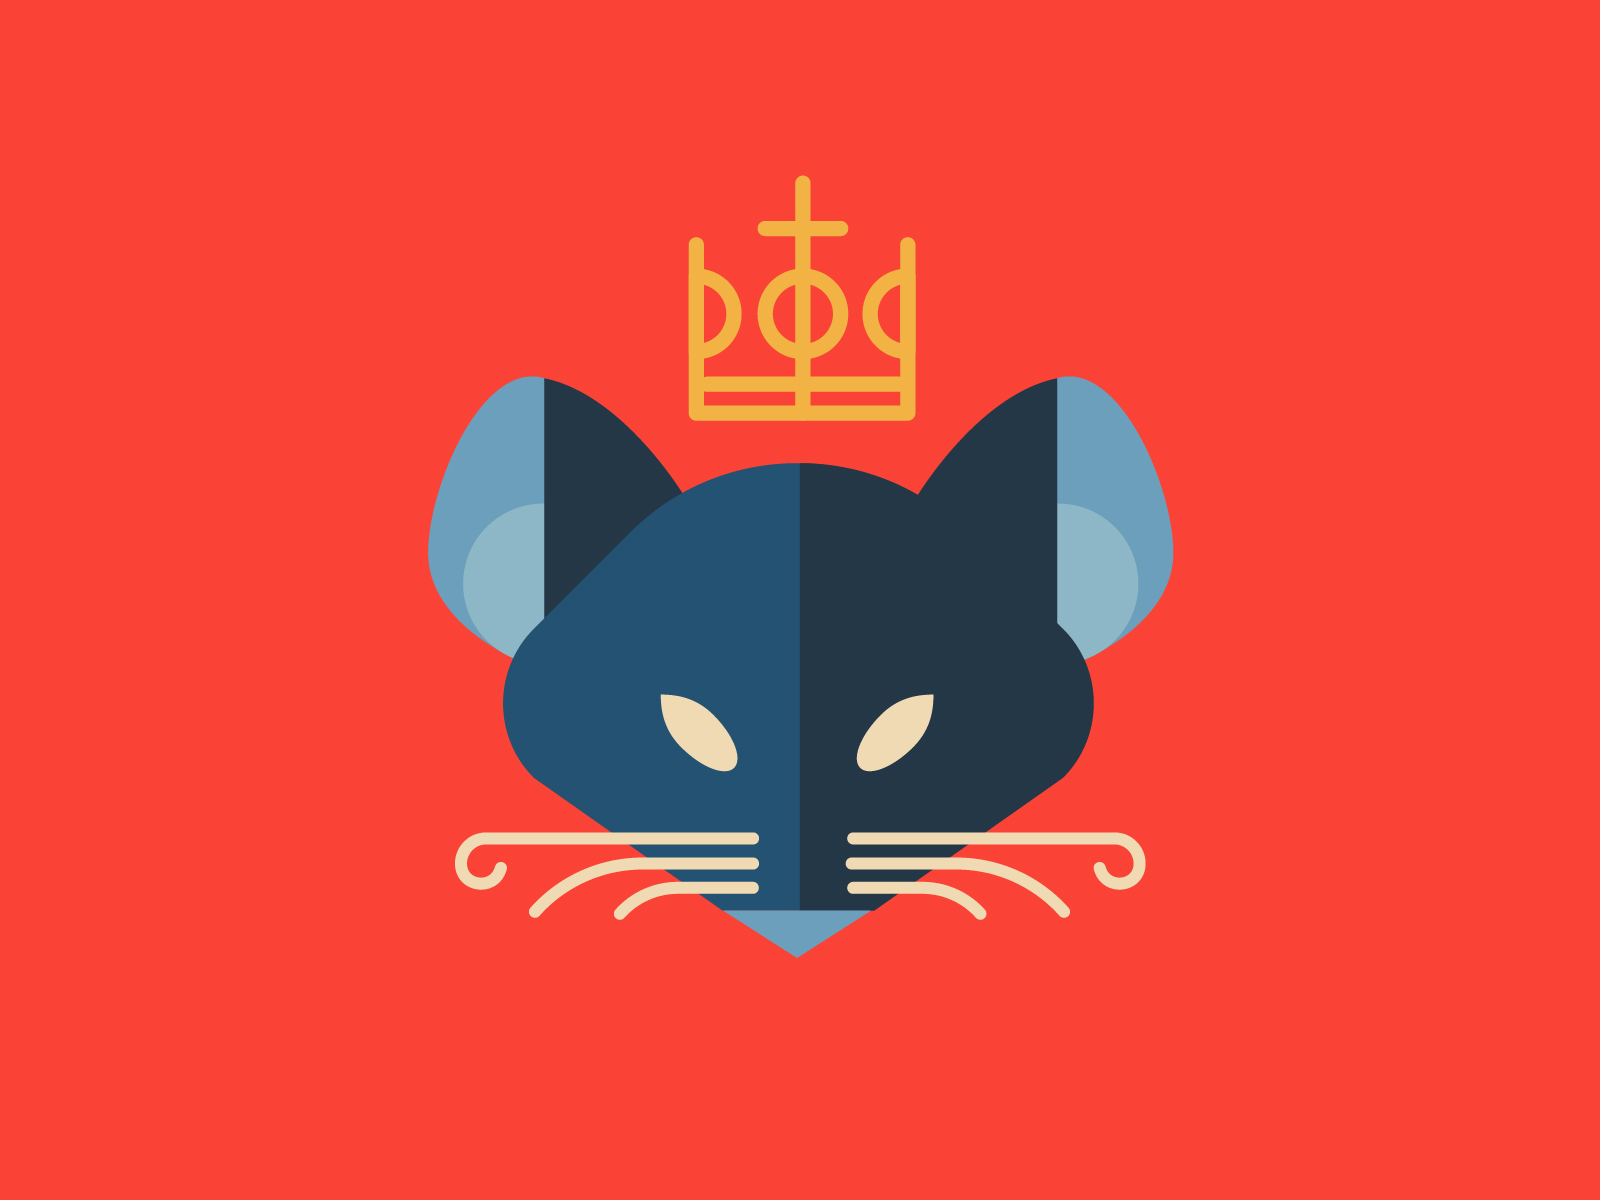 Goodbye 2020 crown goodbye 2020 color vector illustration graphicdesign creative design year of the rat rat zodiac chinese zodiac